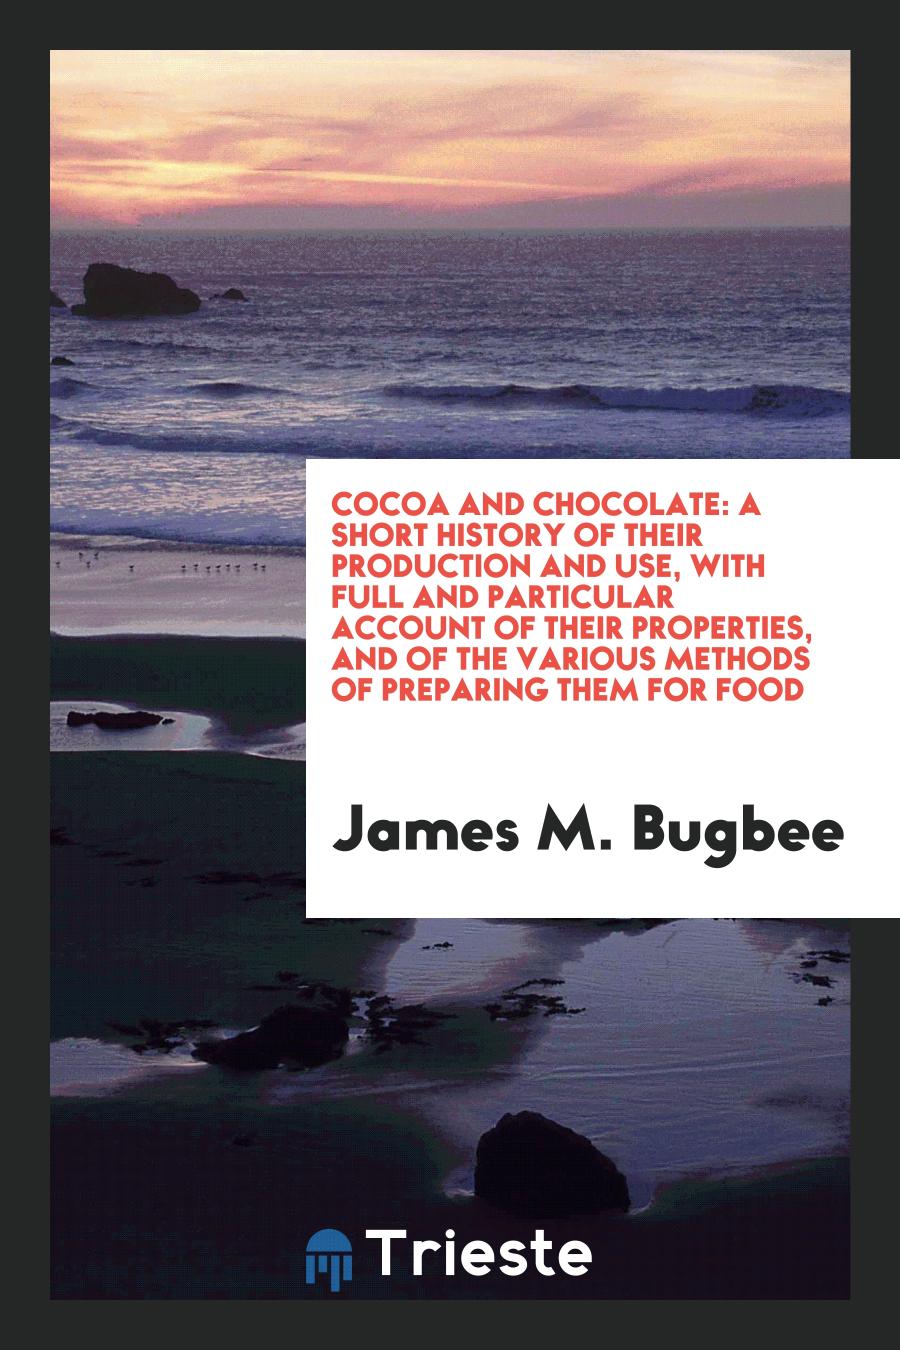 Cocoa and Chocolate: A Short History of Their Production and Use, with Full and Particular Account of their Properties, and of the Various Methods of Preparing Them for Food